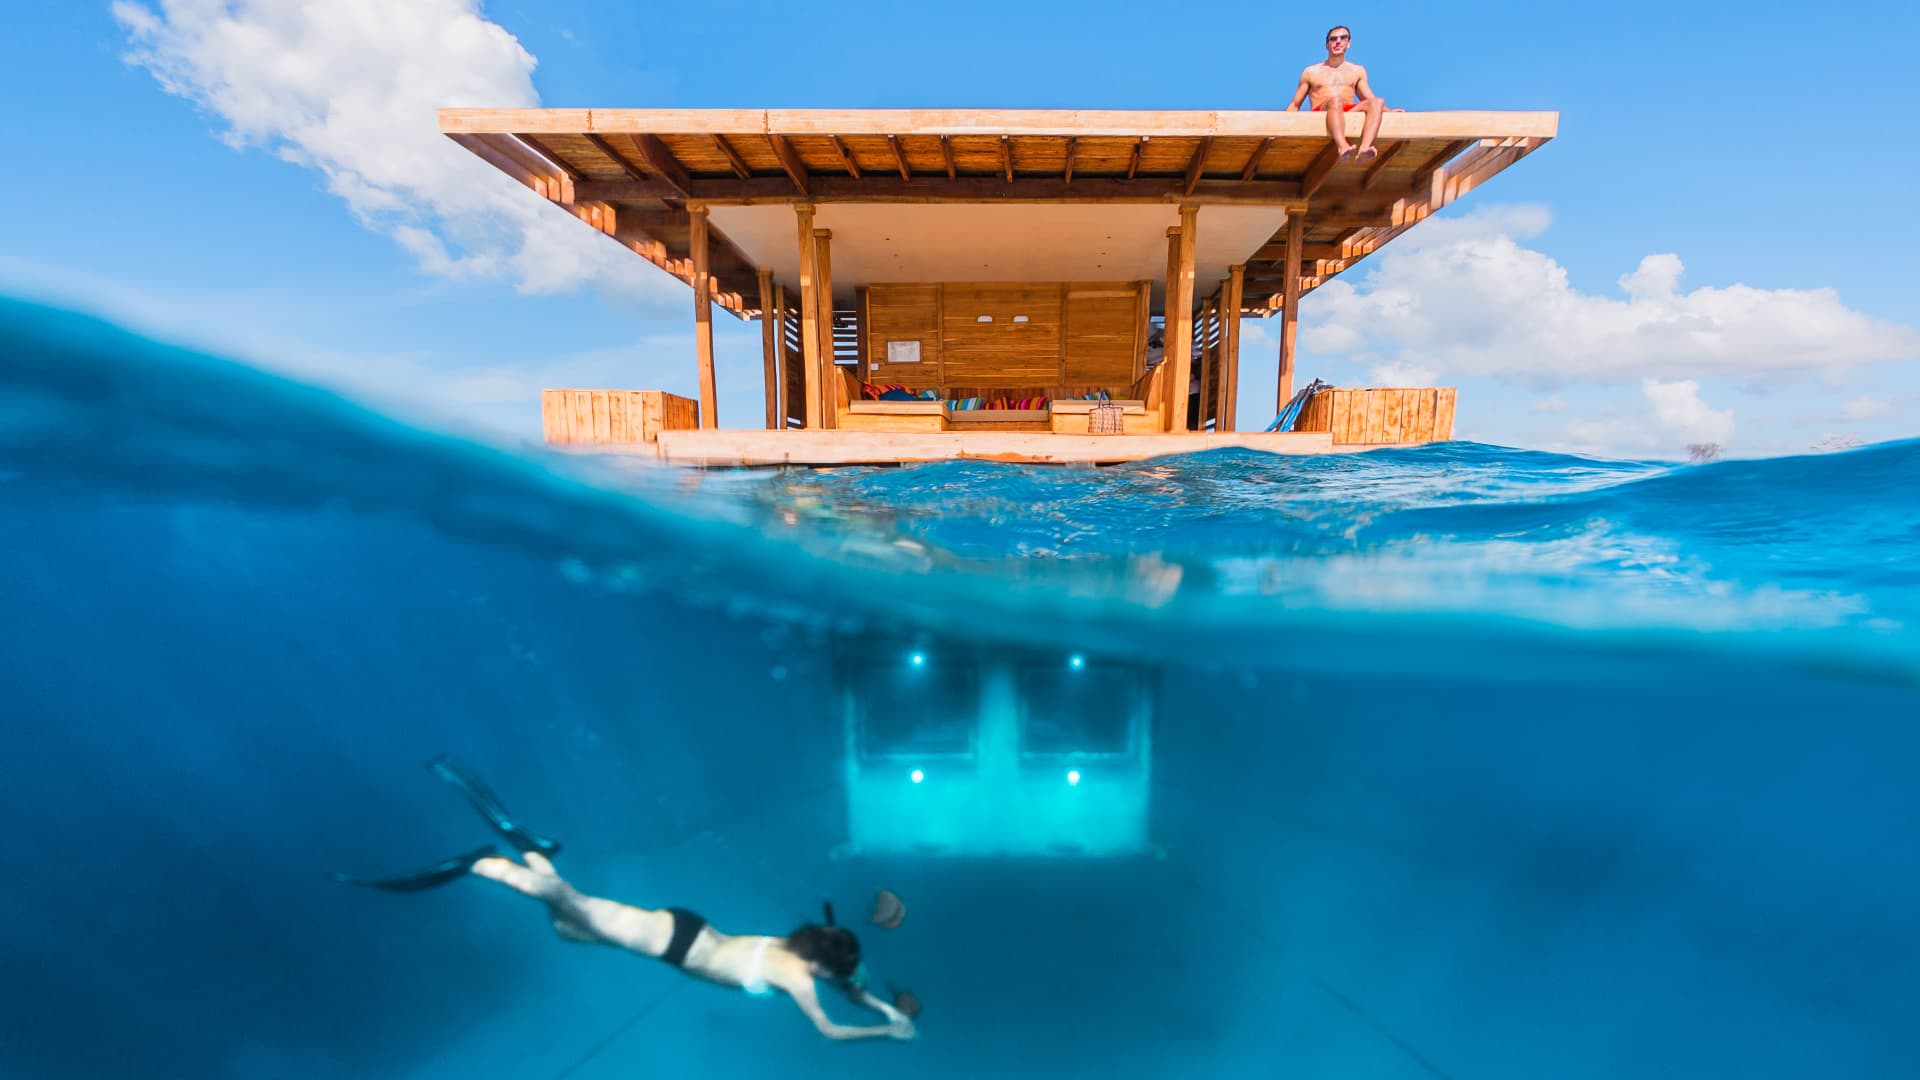 Eat Drink And Sleep In This Amazing Underwater Hotel Room